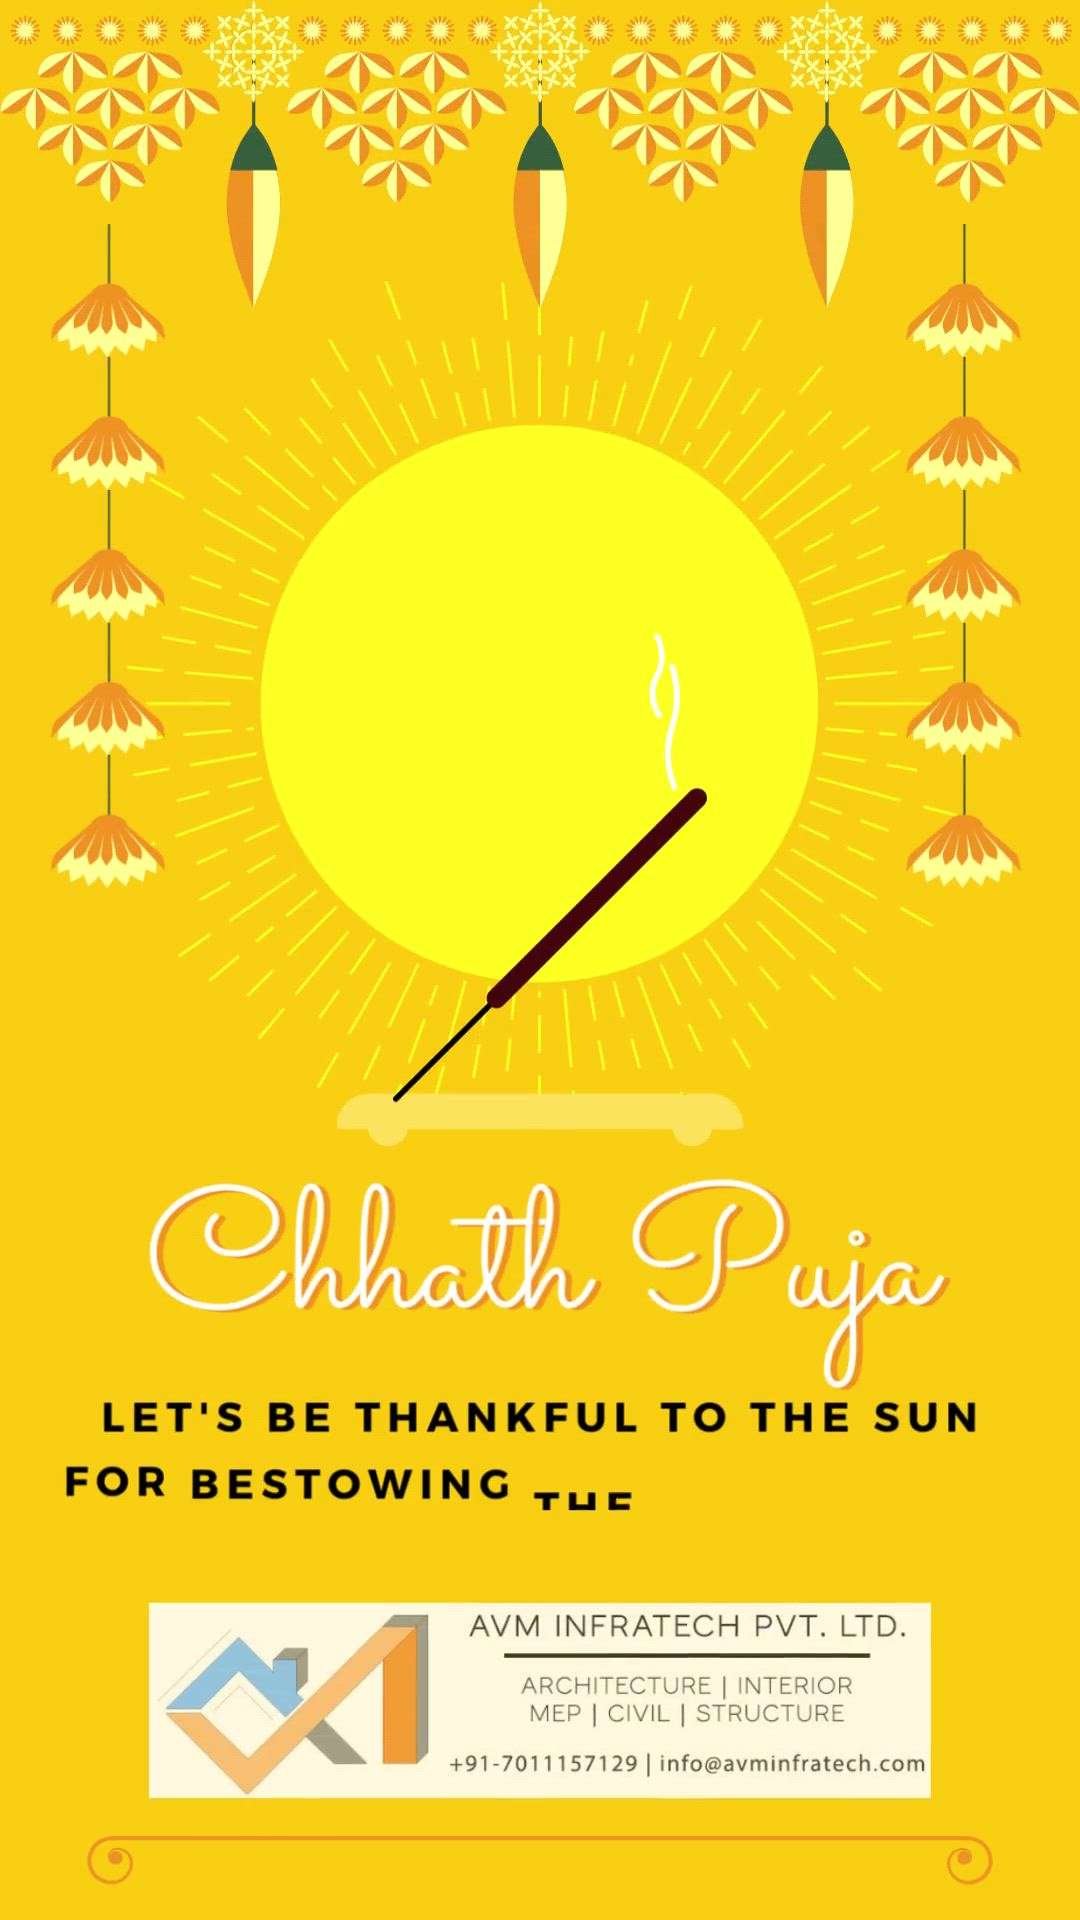 Wishing you and your family a very Happy Chhath Puja! 


Follow us for more such amazing updates.
.
.
#chhathpuja #chhath #chhathpujasong #chhathmahaparv #chhathpuja2021 #chhathpooja #chhathparv #chhathpuja2020 #chhathiceremony #chhathpuja2022 #chhath_puja #chhathsong #chhath_puja #festival #festivities #indian #indianfestival #indianfestivals #architect #architecture #interior #interiordesign #celebrate #celebration